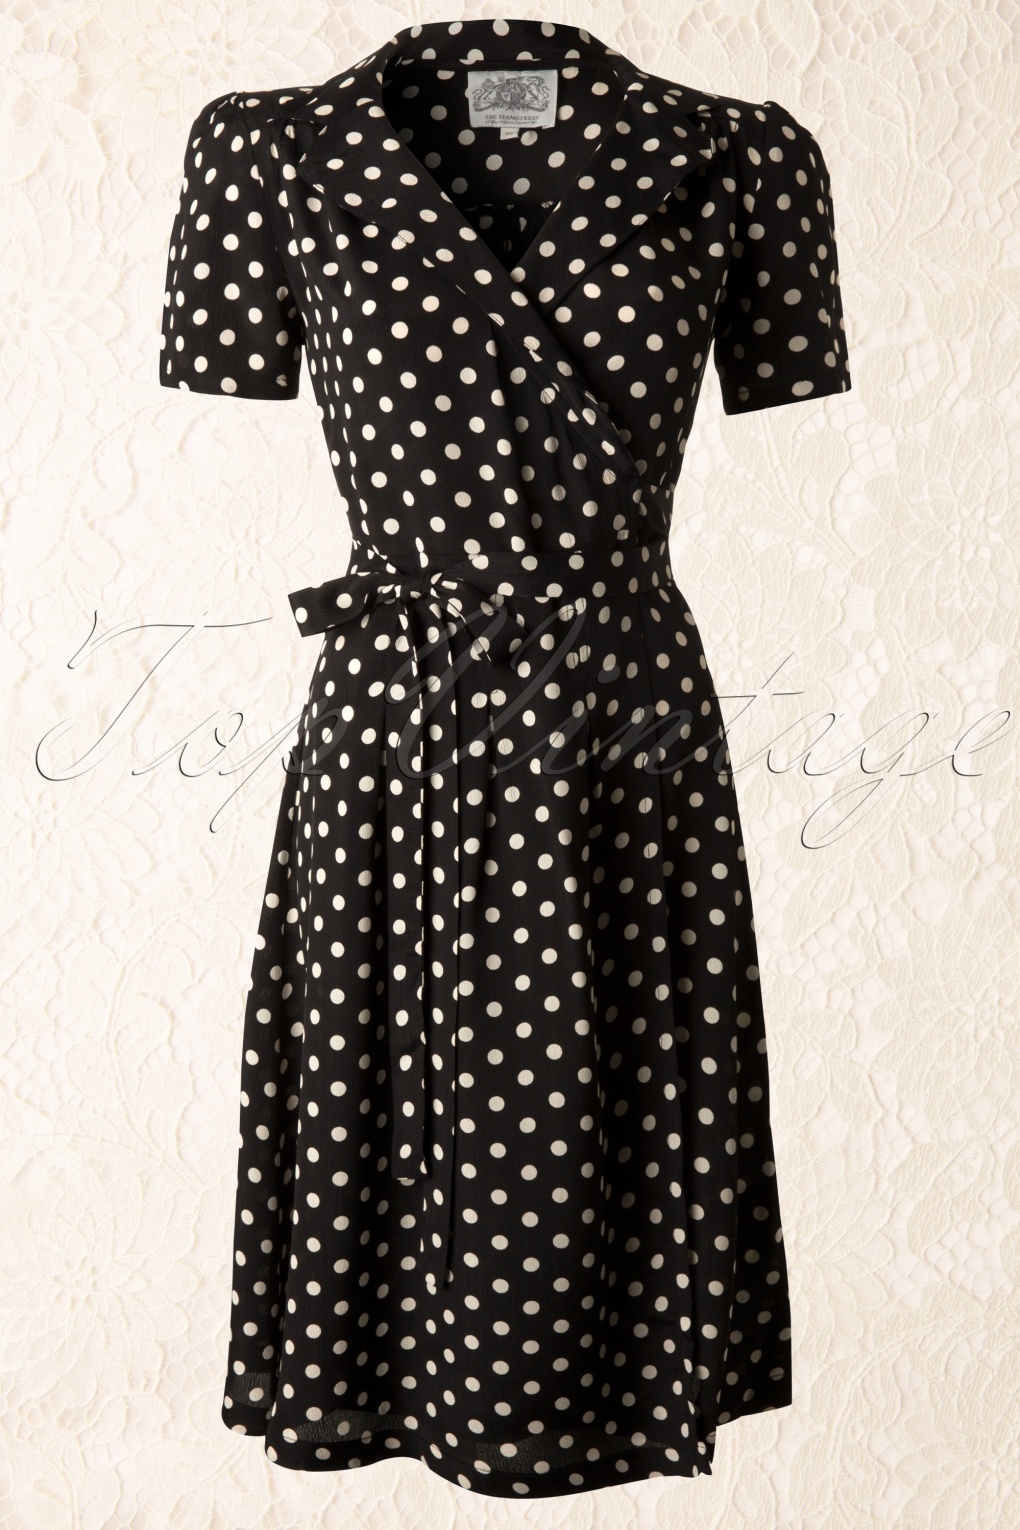 40s Peggy Wrapover Dress in Black and White